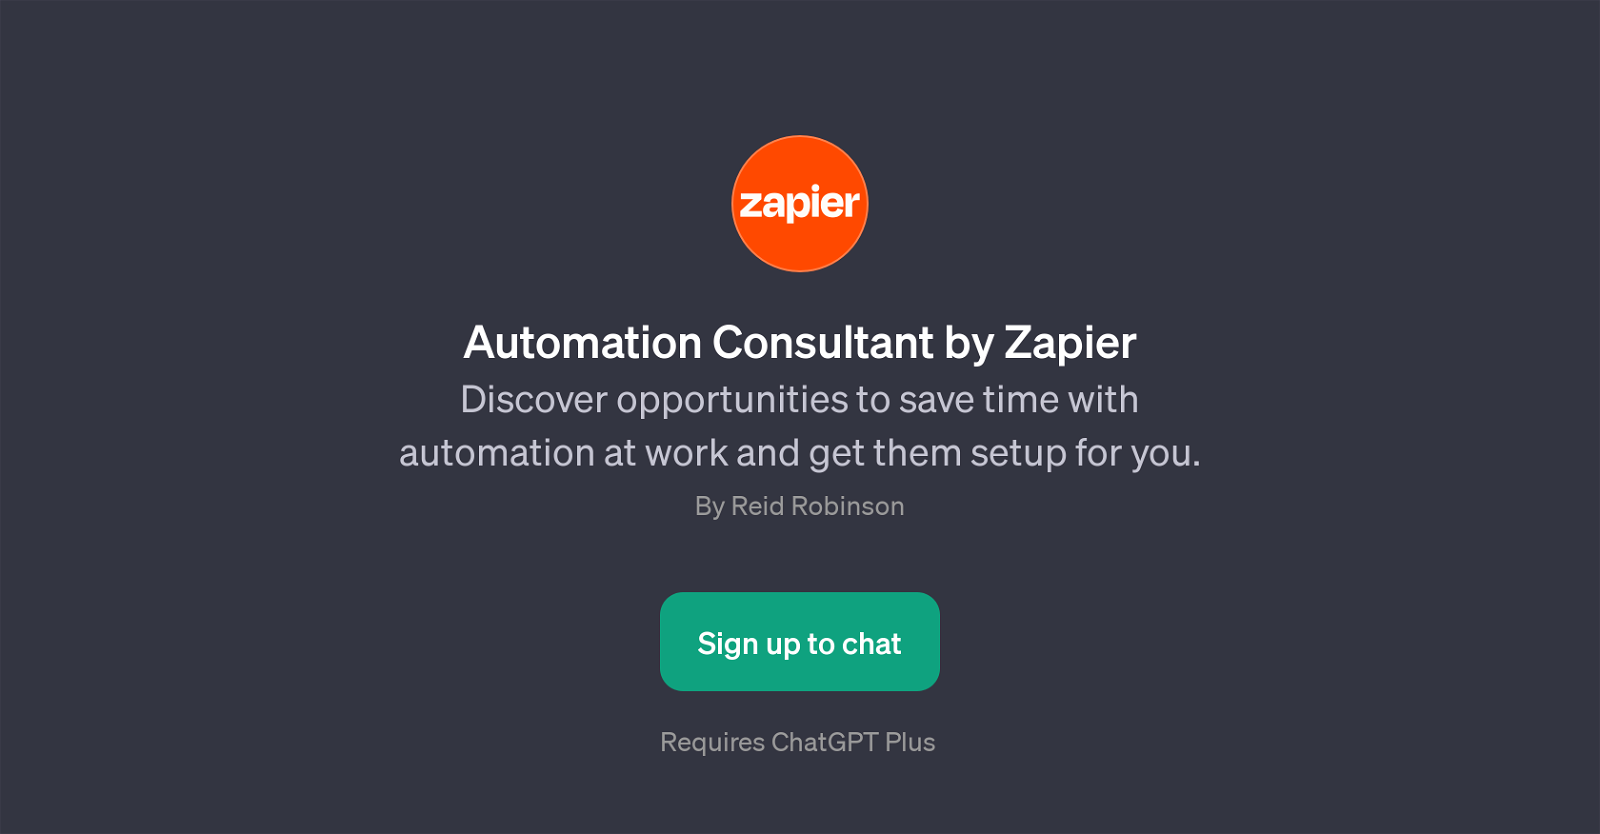 Automation Consultant by Zapier website